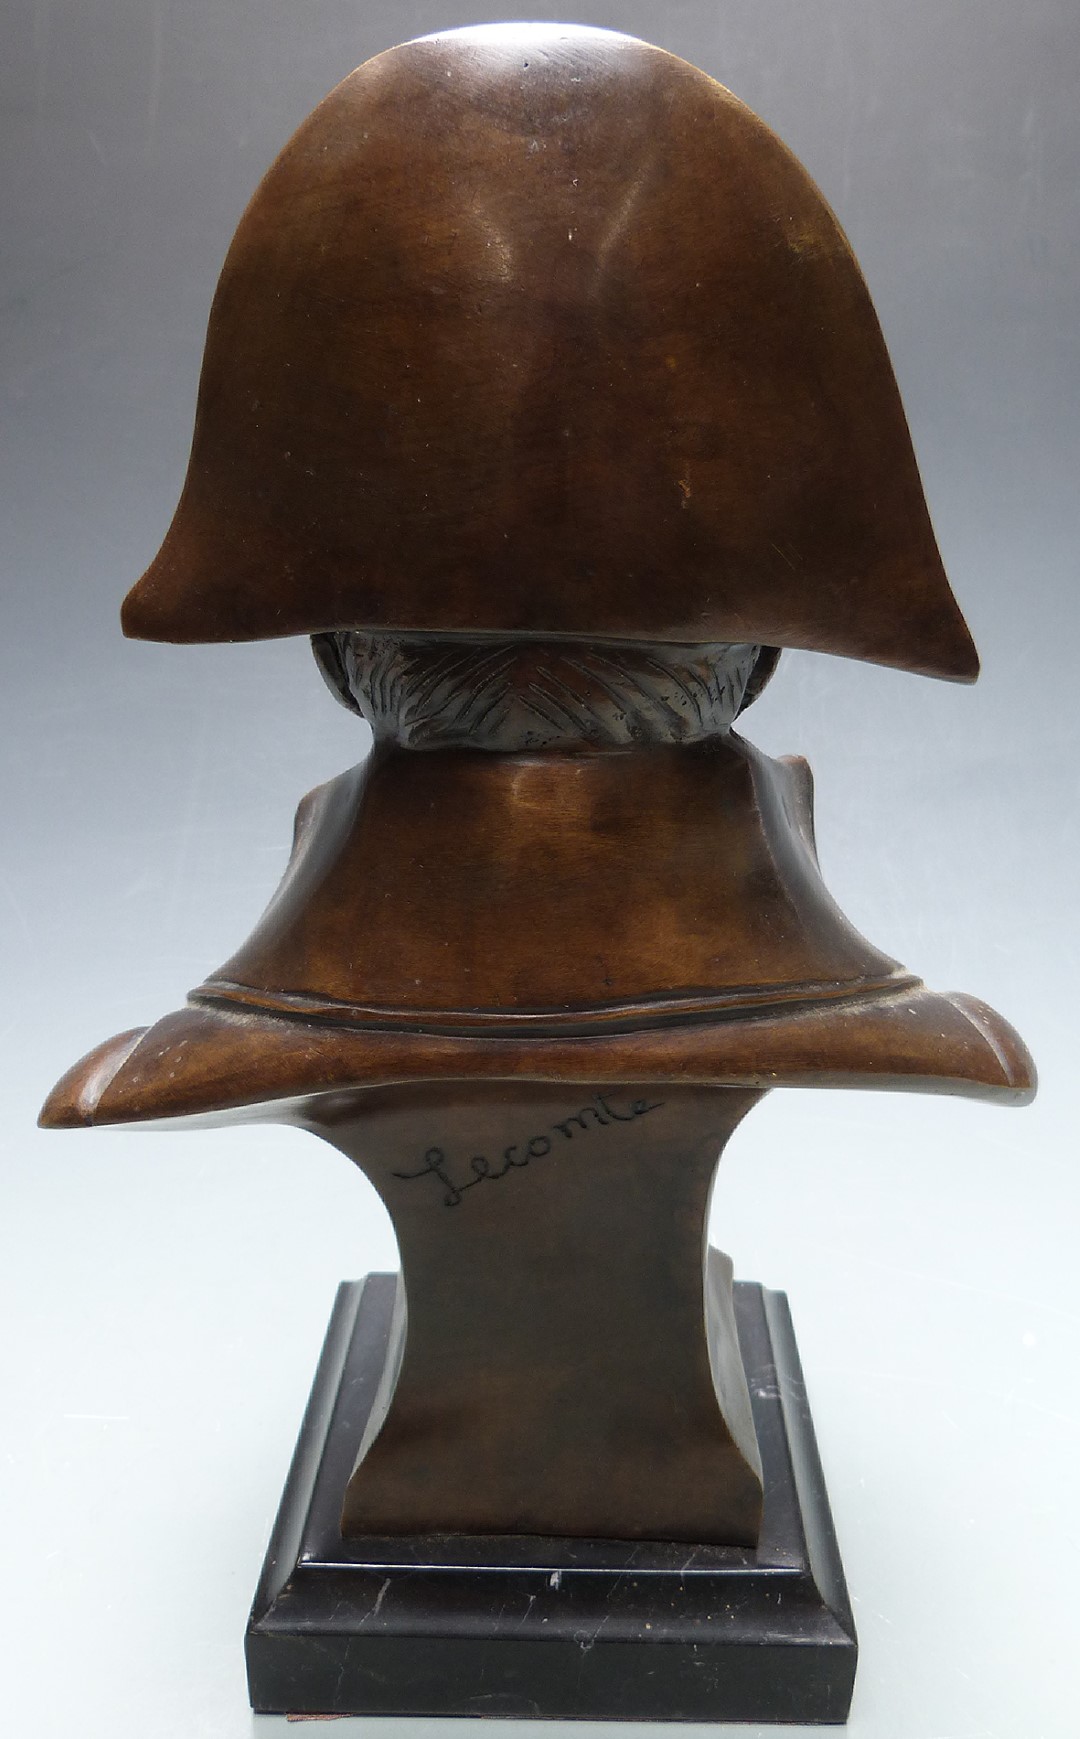 A modern bronze bust of Napoleon signed Le Comte, 35cm tall including plinth - Image 2 of 3